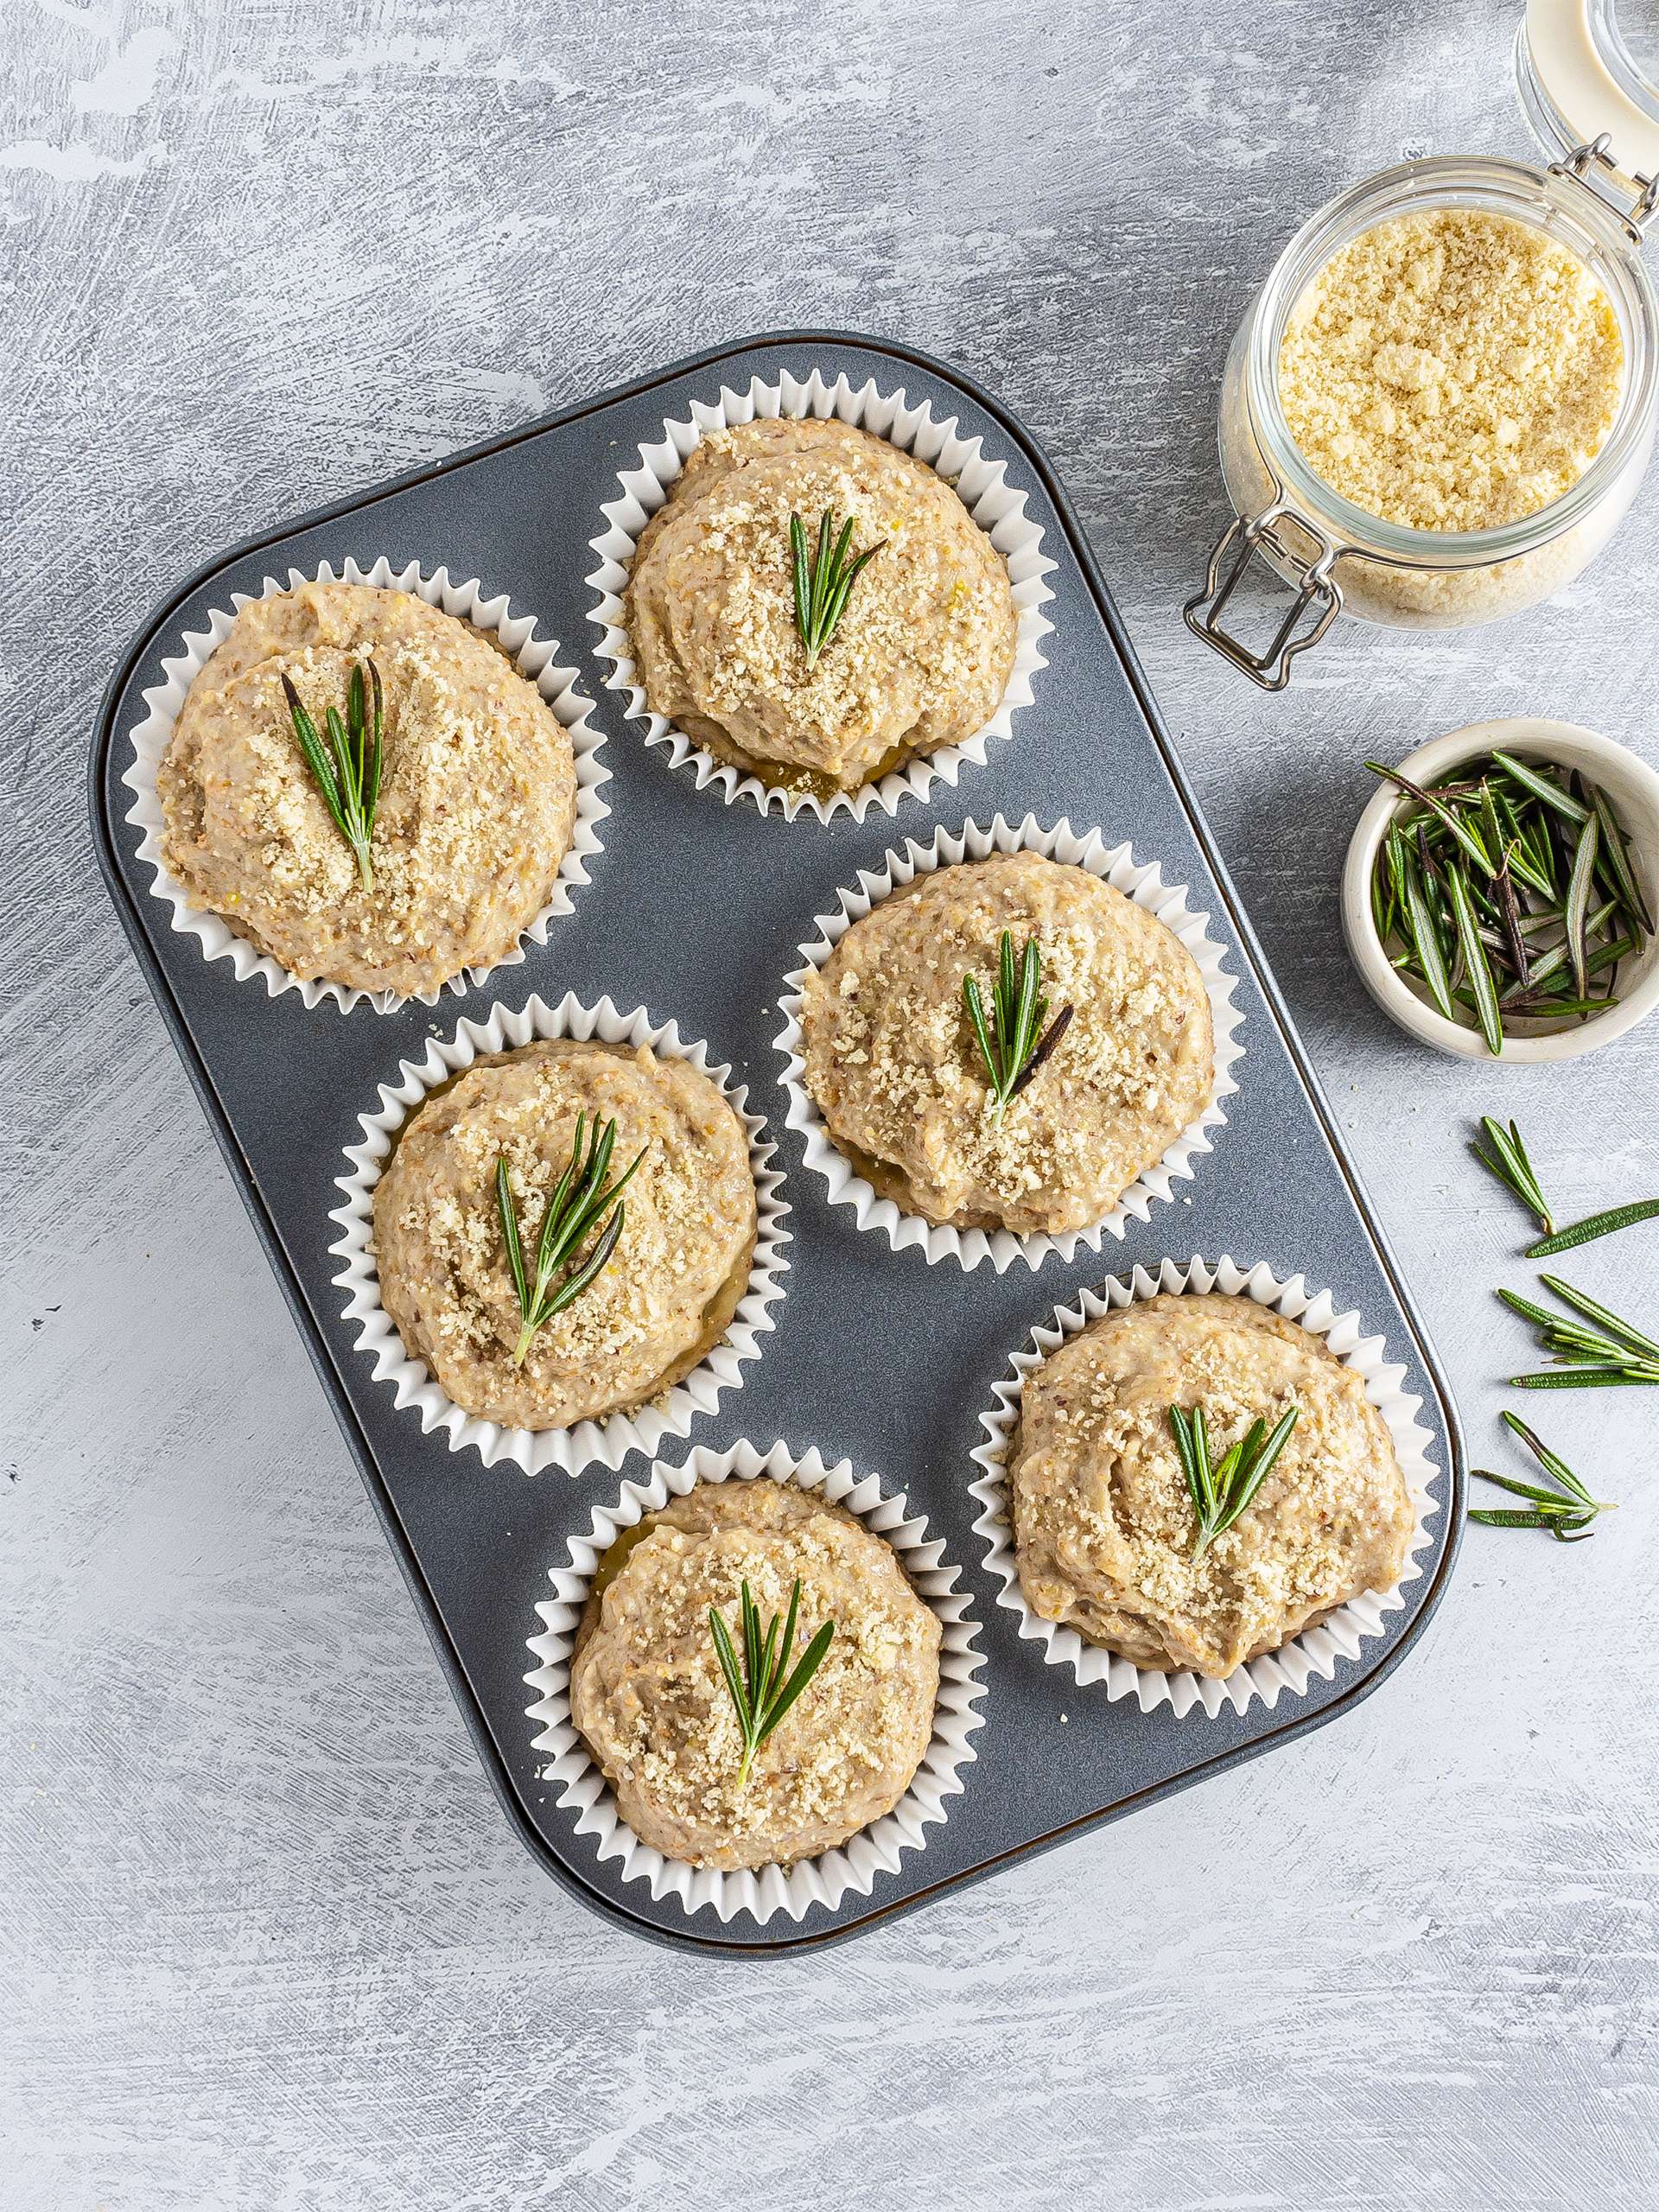 Muffins garnished with rosemary